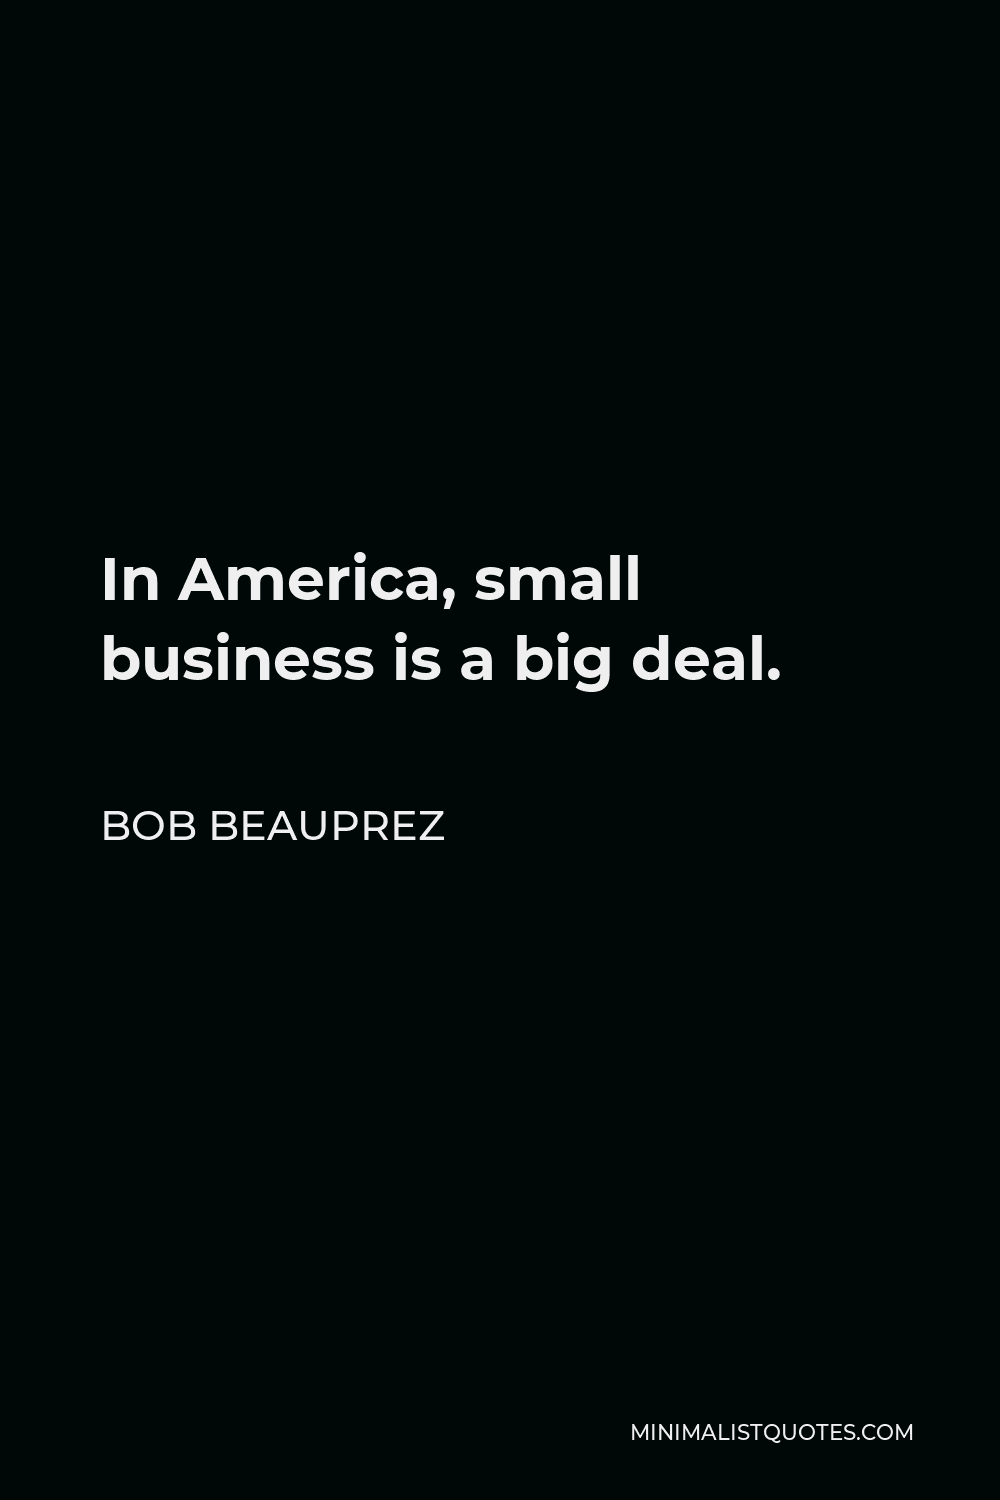 Bob Beauprez Quote - In America, small business is a big deal.